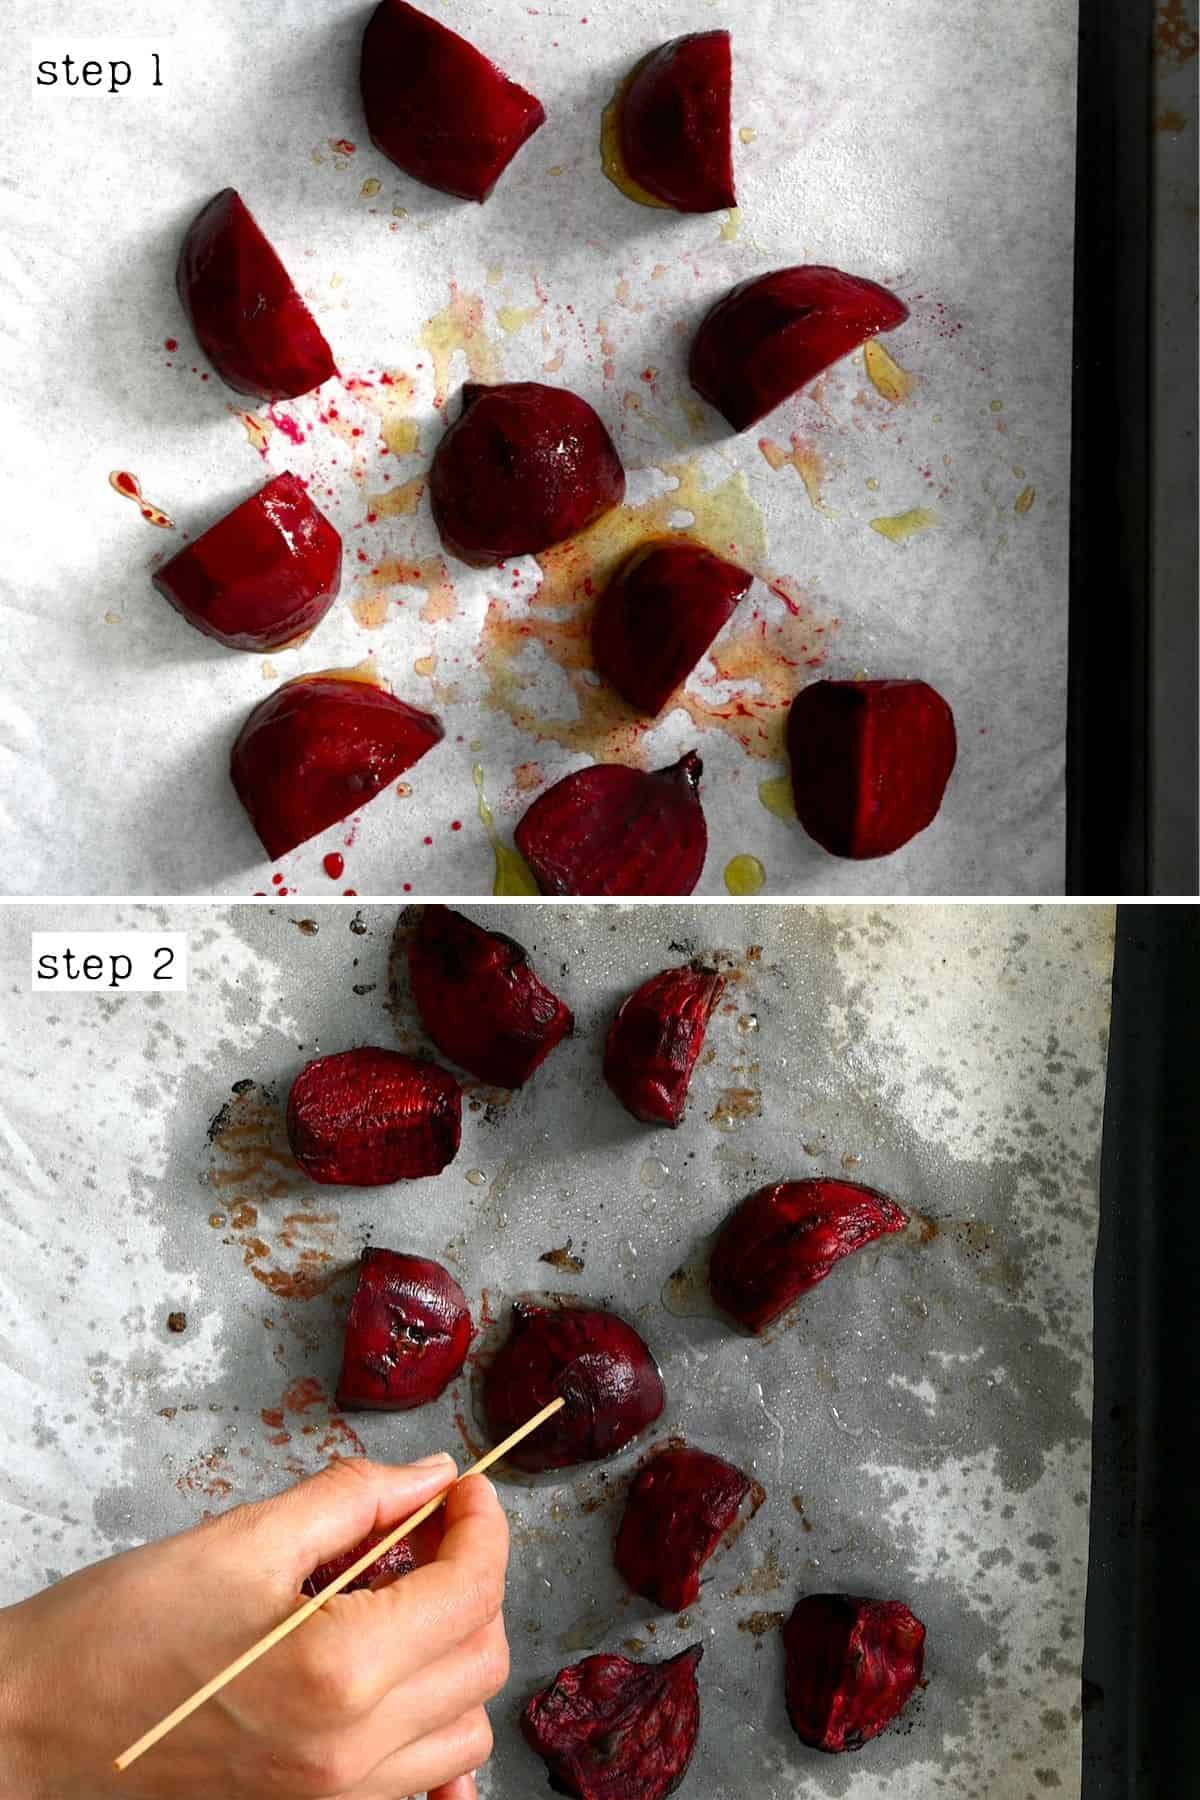 Steps for roasting beets